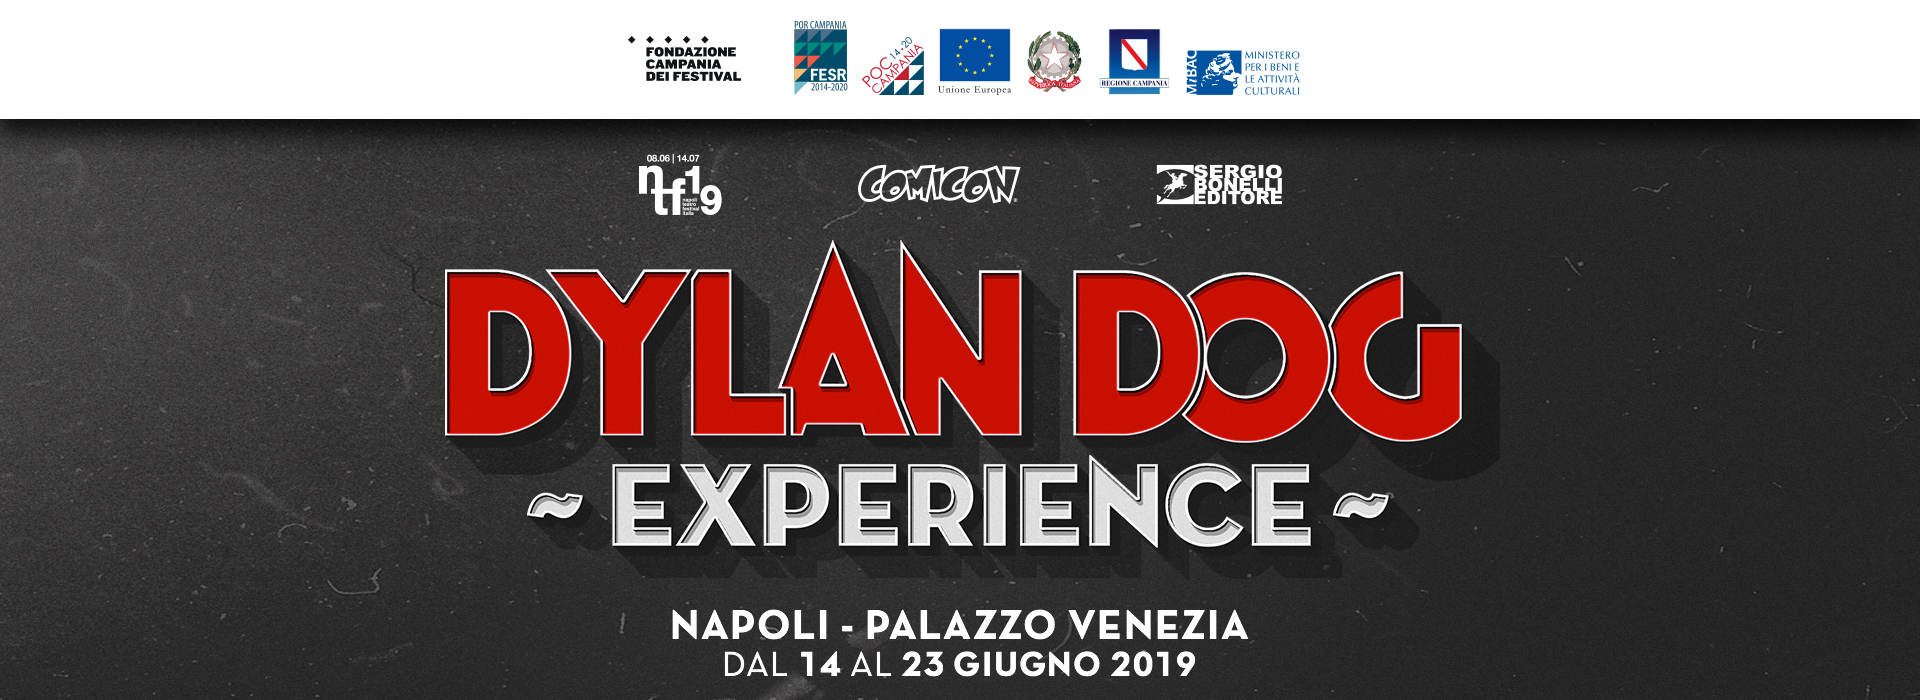 Dylan Dog Experience in arrivo a Napoli thumbnail